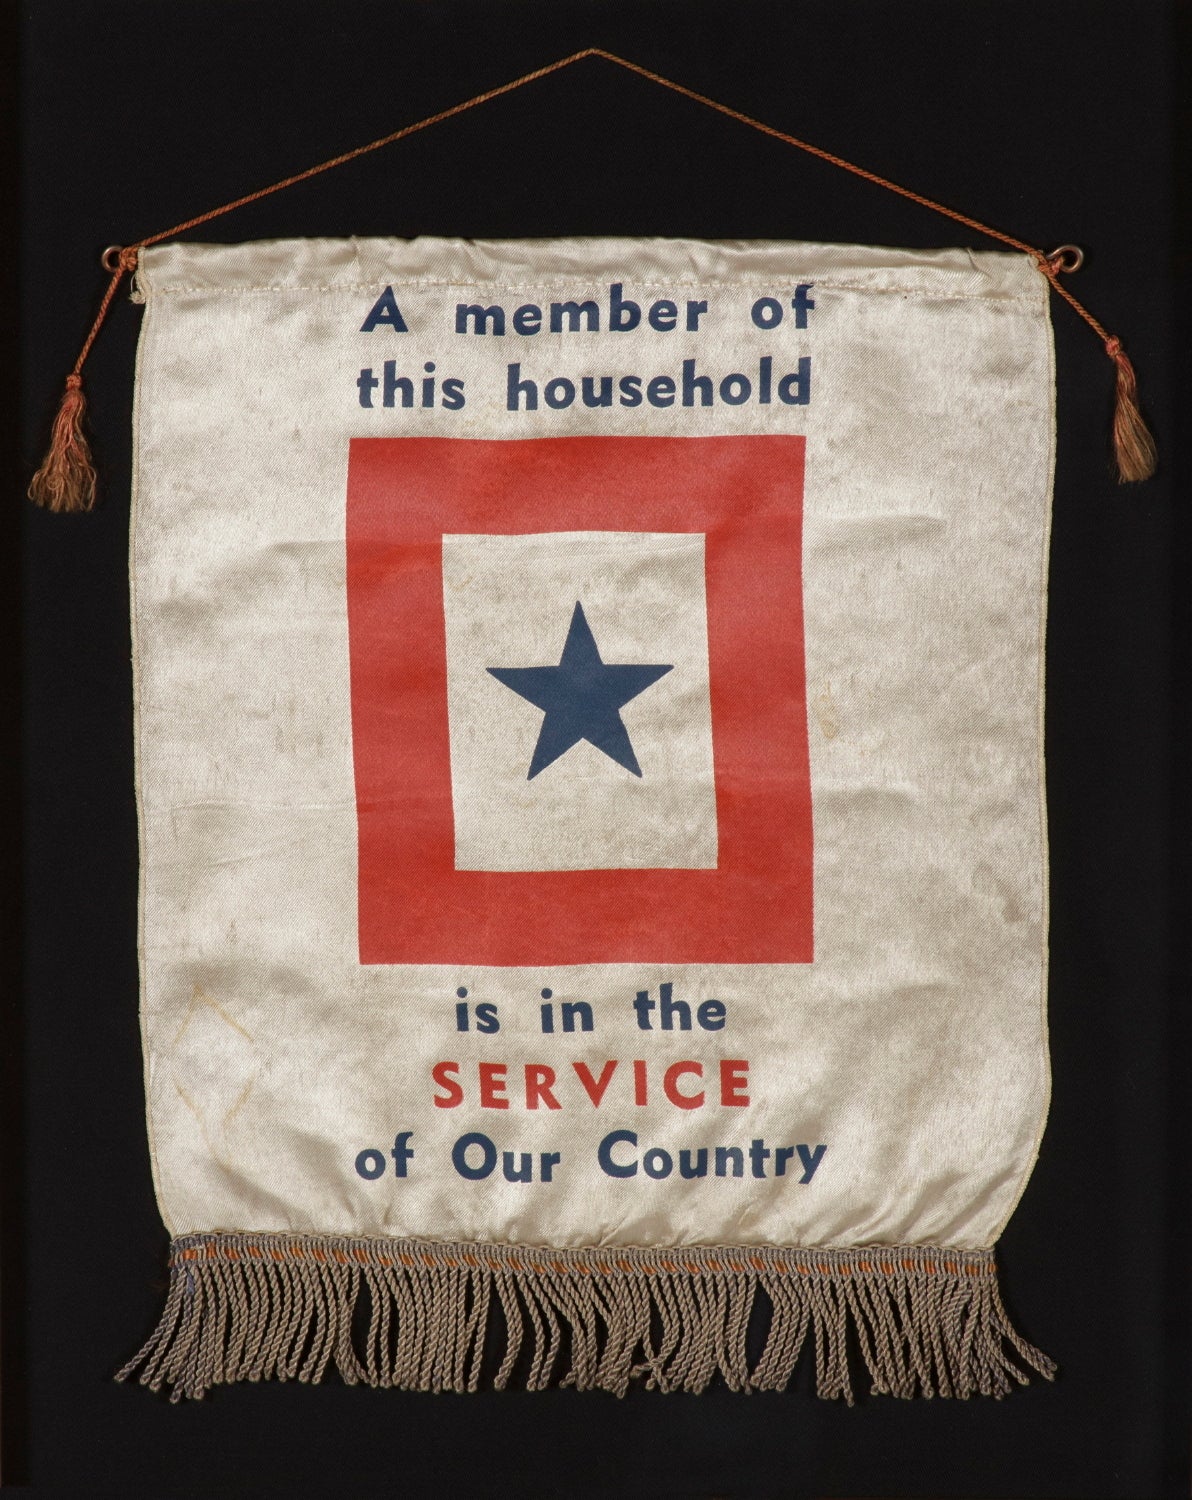 WWII SON-IN-SERVICE BANNER IN A NICE SIZE WITH APPEALING TEXT:

The practice of displaying a son-in-service banner became popular during WWI (U.S. involvement 1917-1918) and was continued or even increased during WWII (U.S. involvement 1941-45).